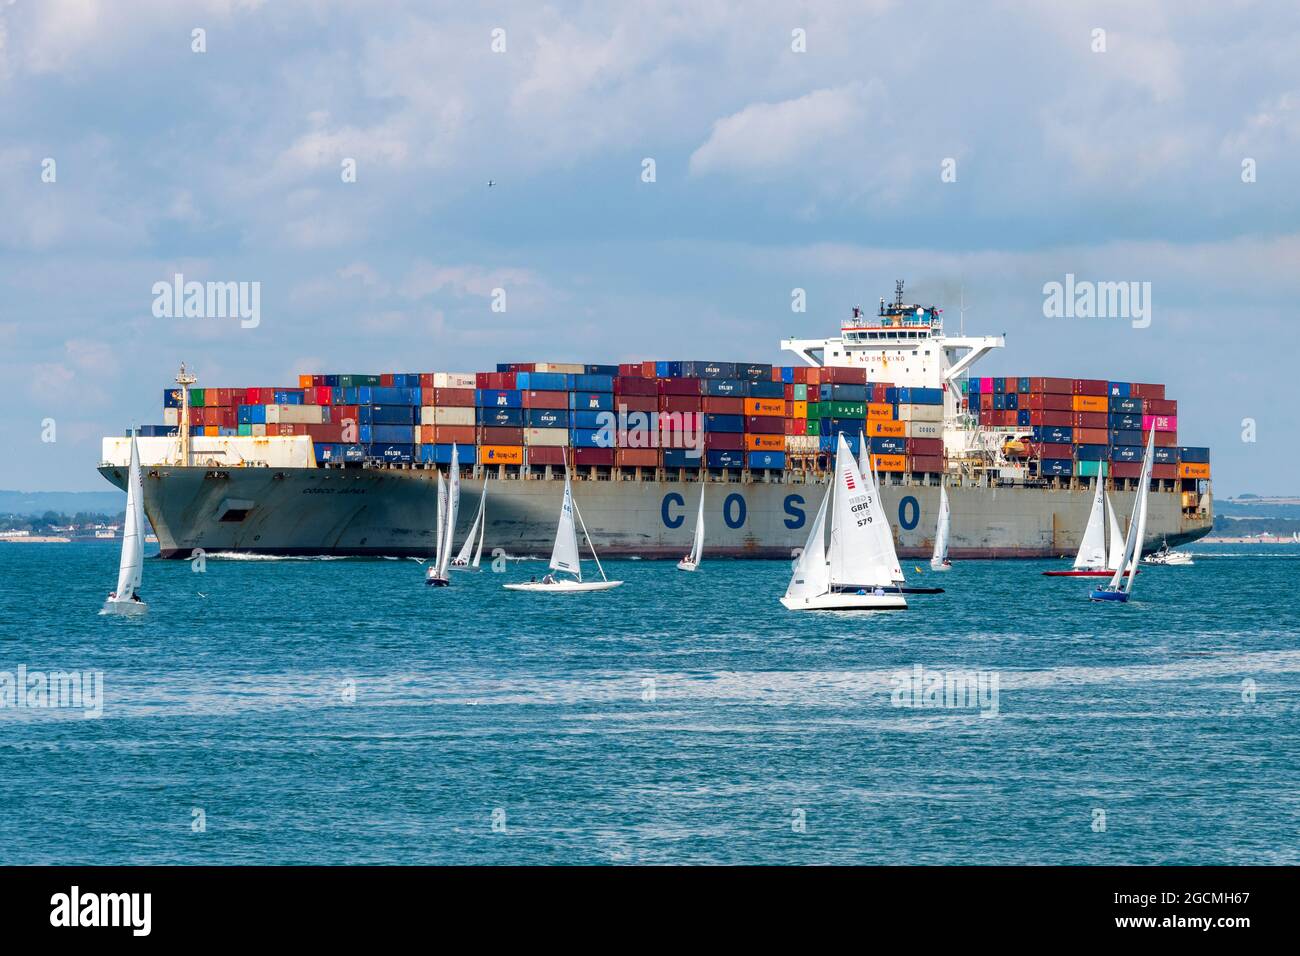 cowes week, container ship in solent, container ship close to yachts, container ship in thorn channel, container ship arriving in solent  southampton. Stock Photo